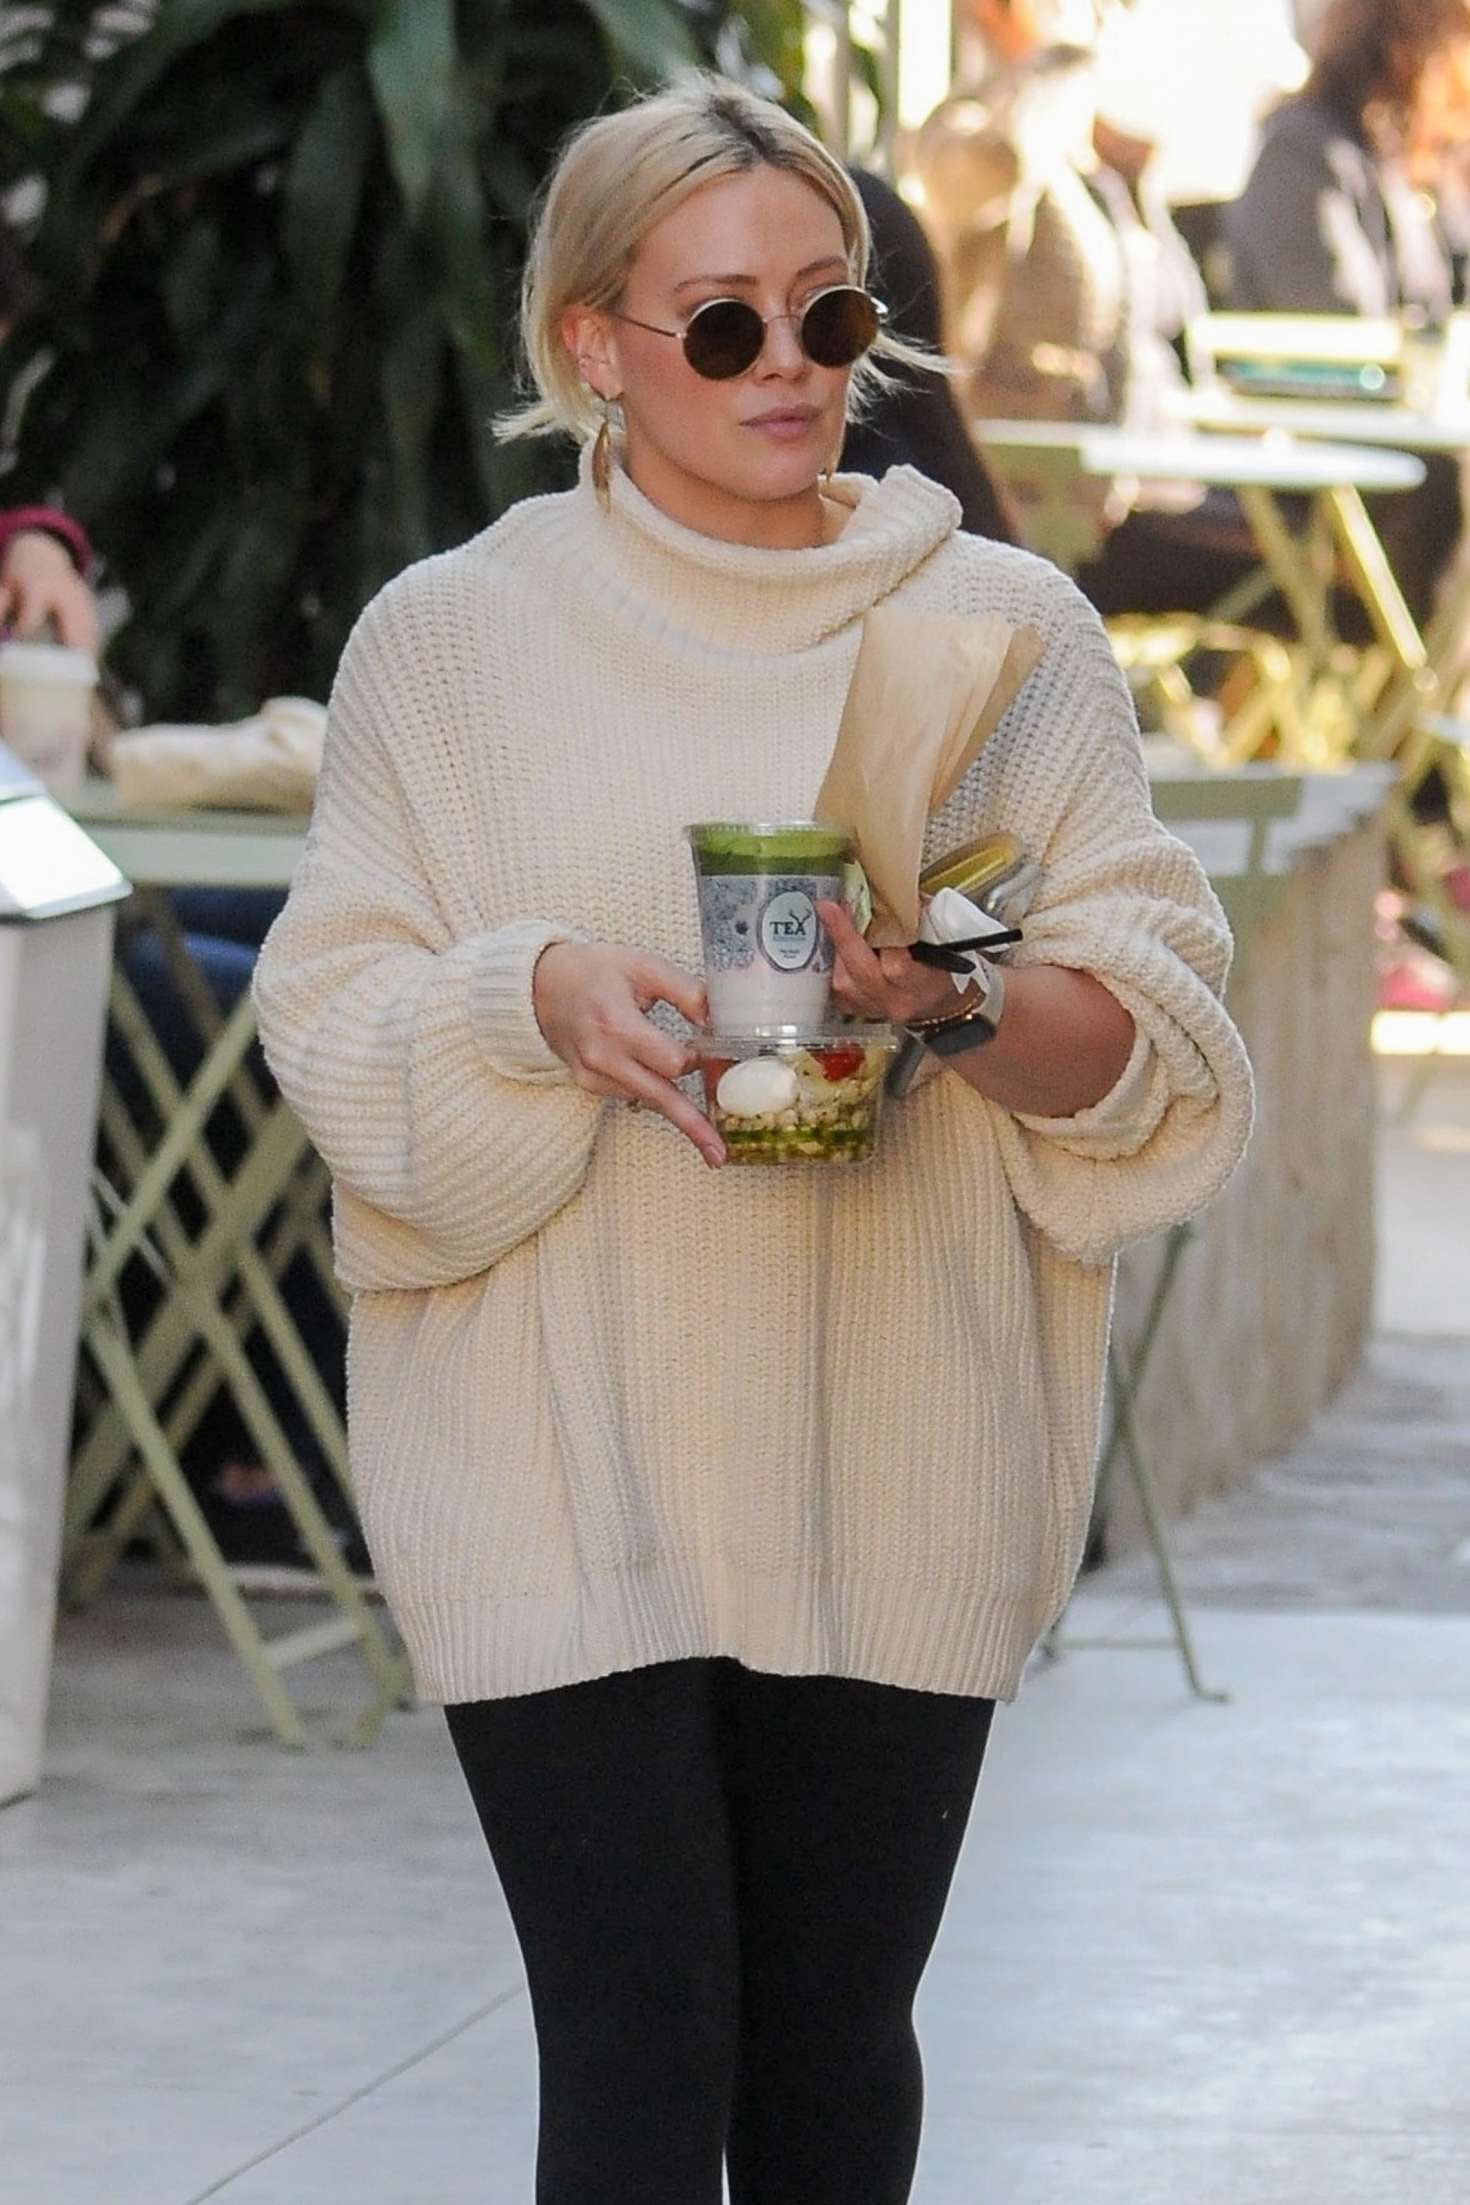 Hilary Duff at Melrose Place in West Hollywood